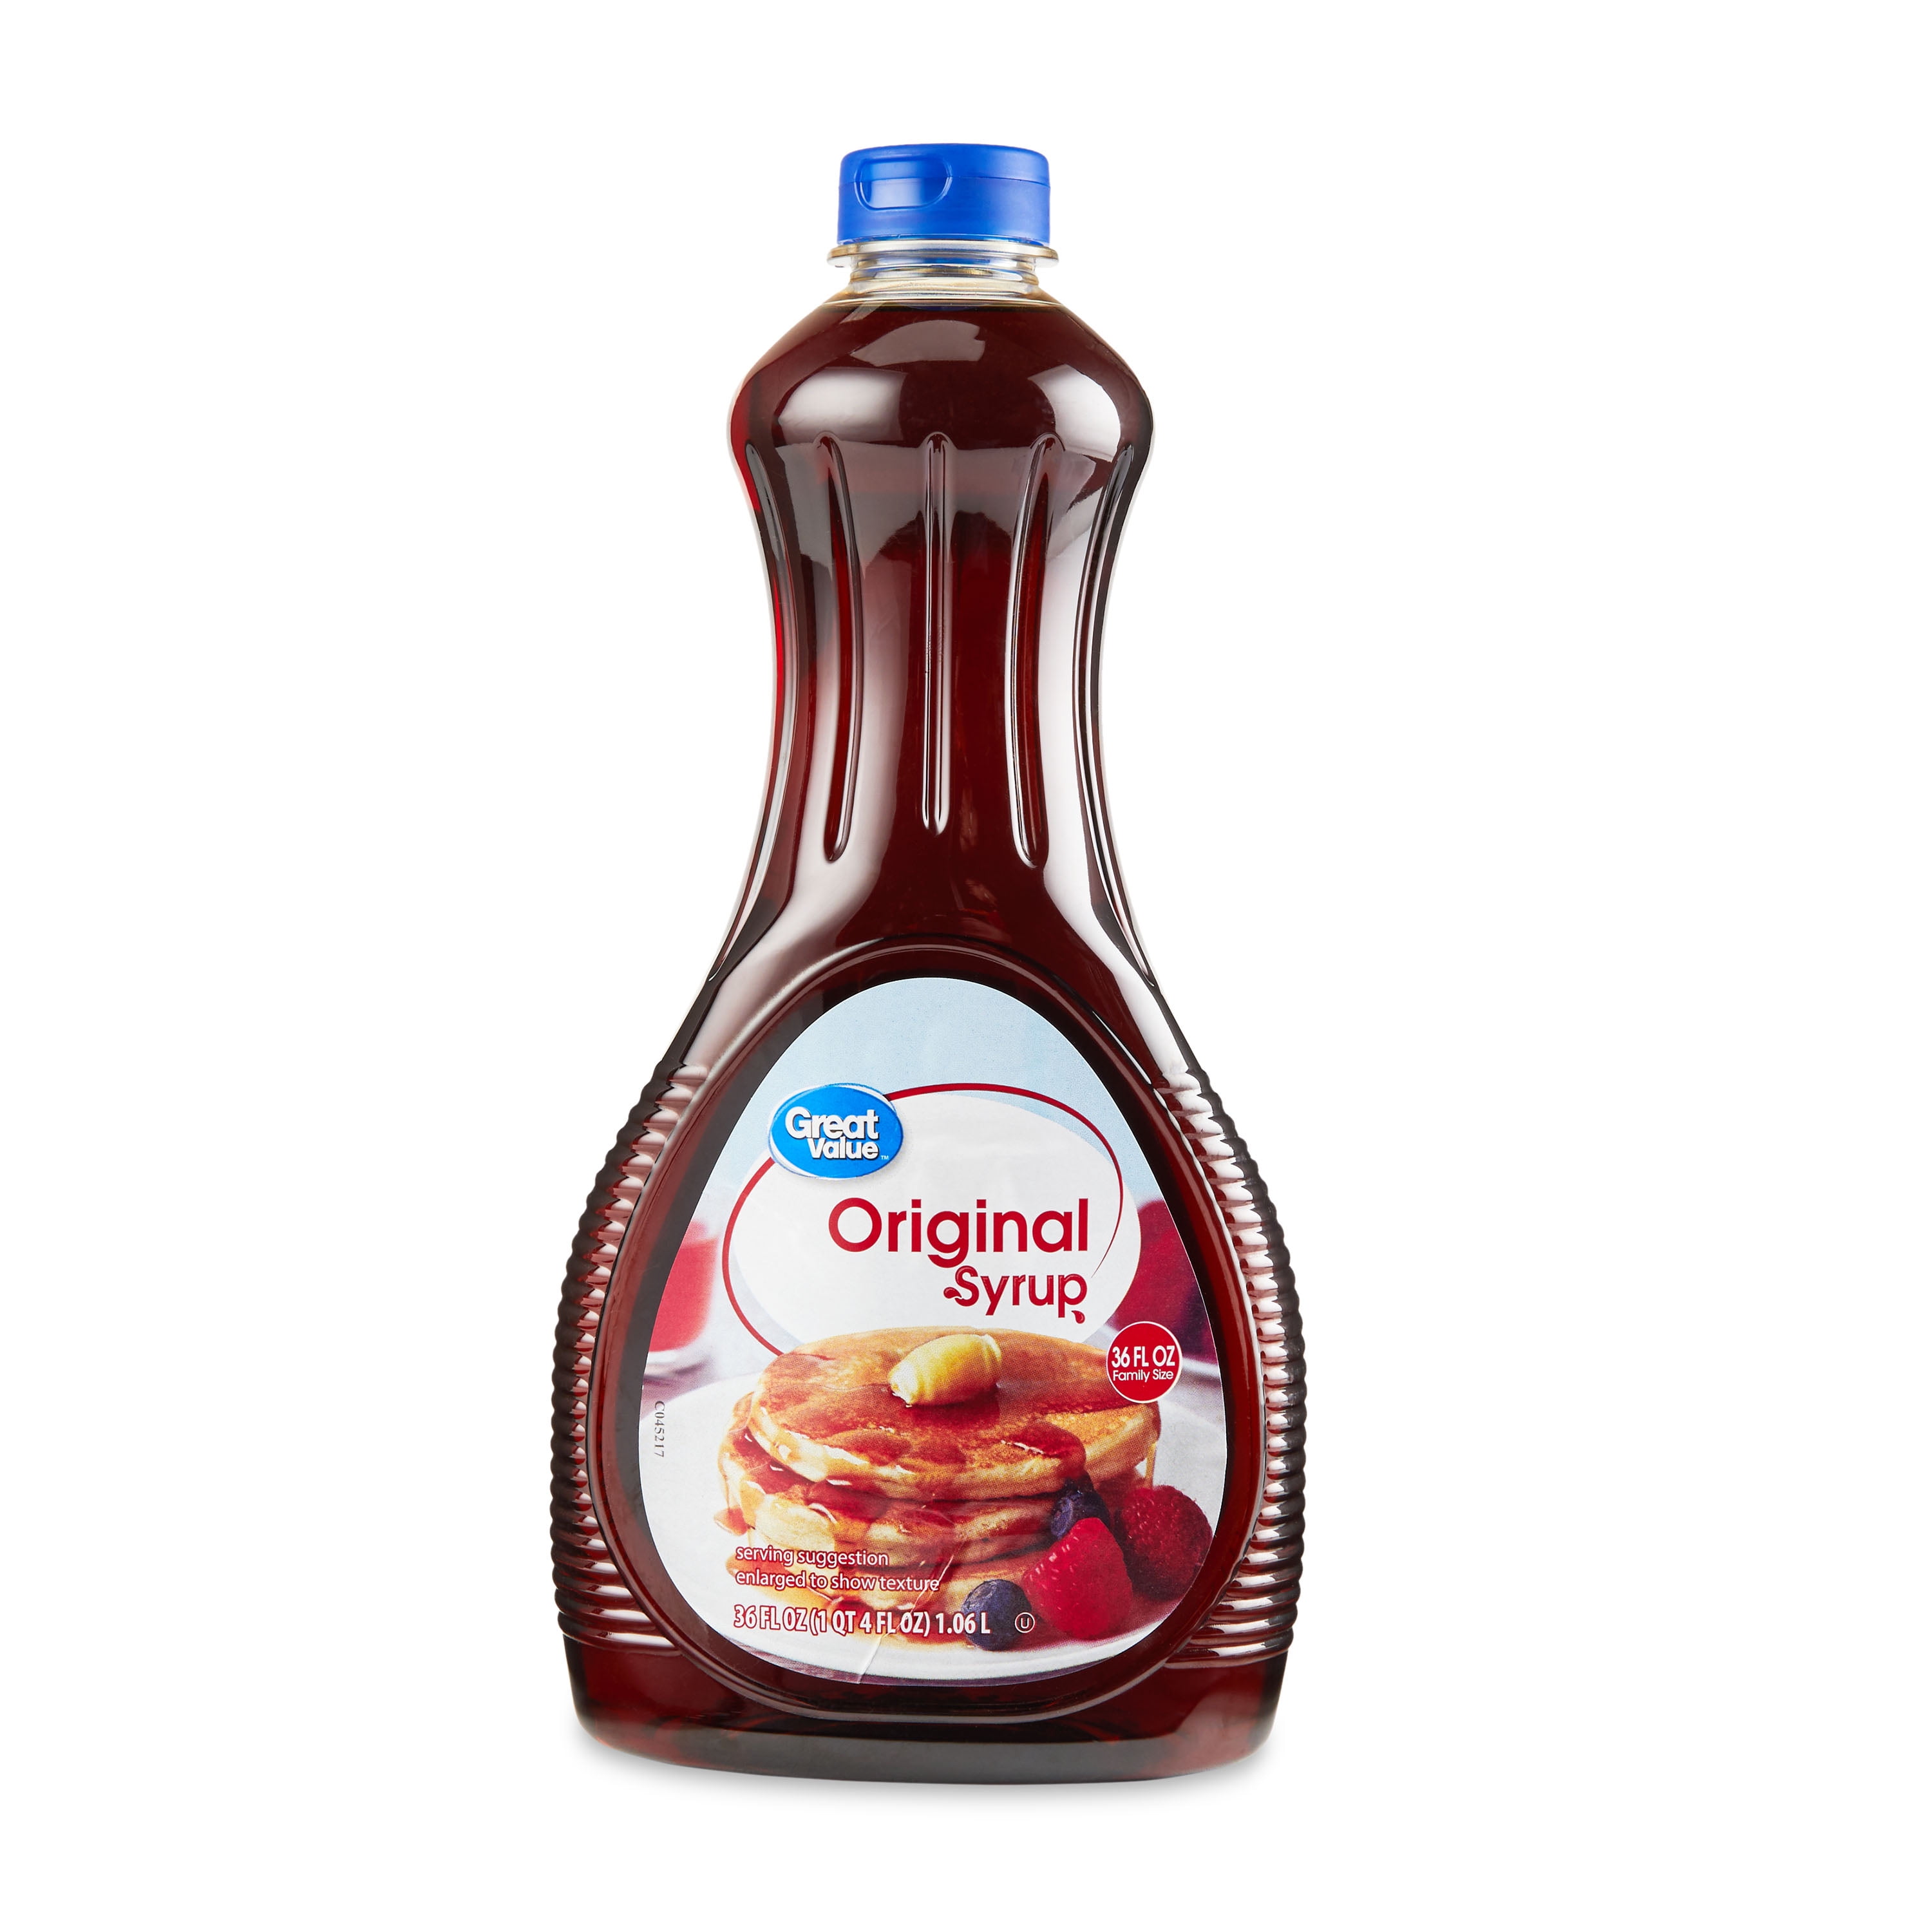 Great Value Original Syrup, Family Size, 36 fl oz